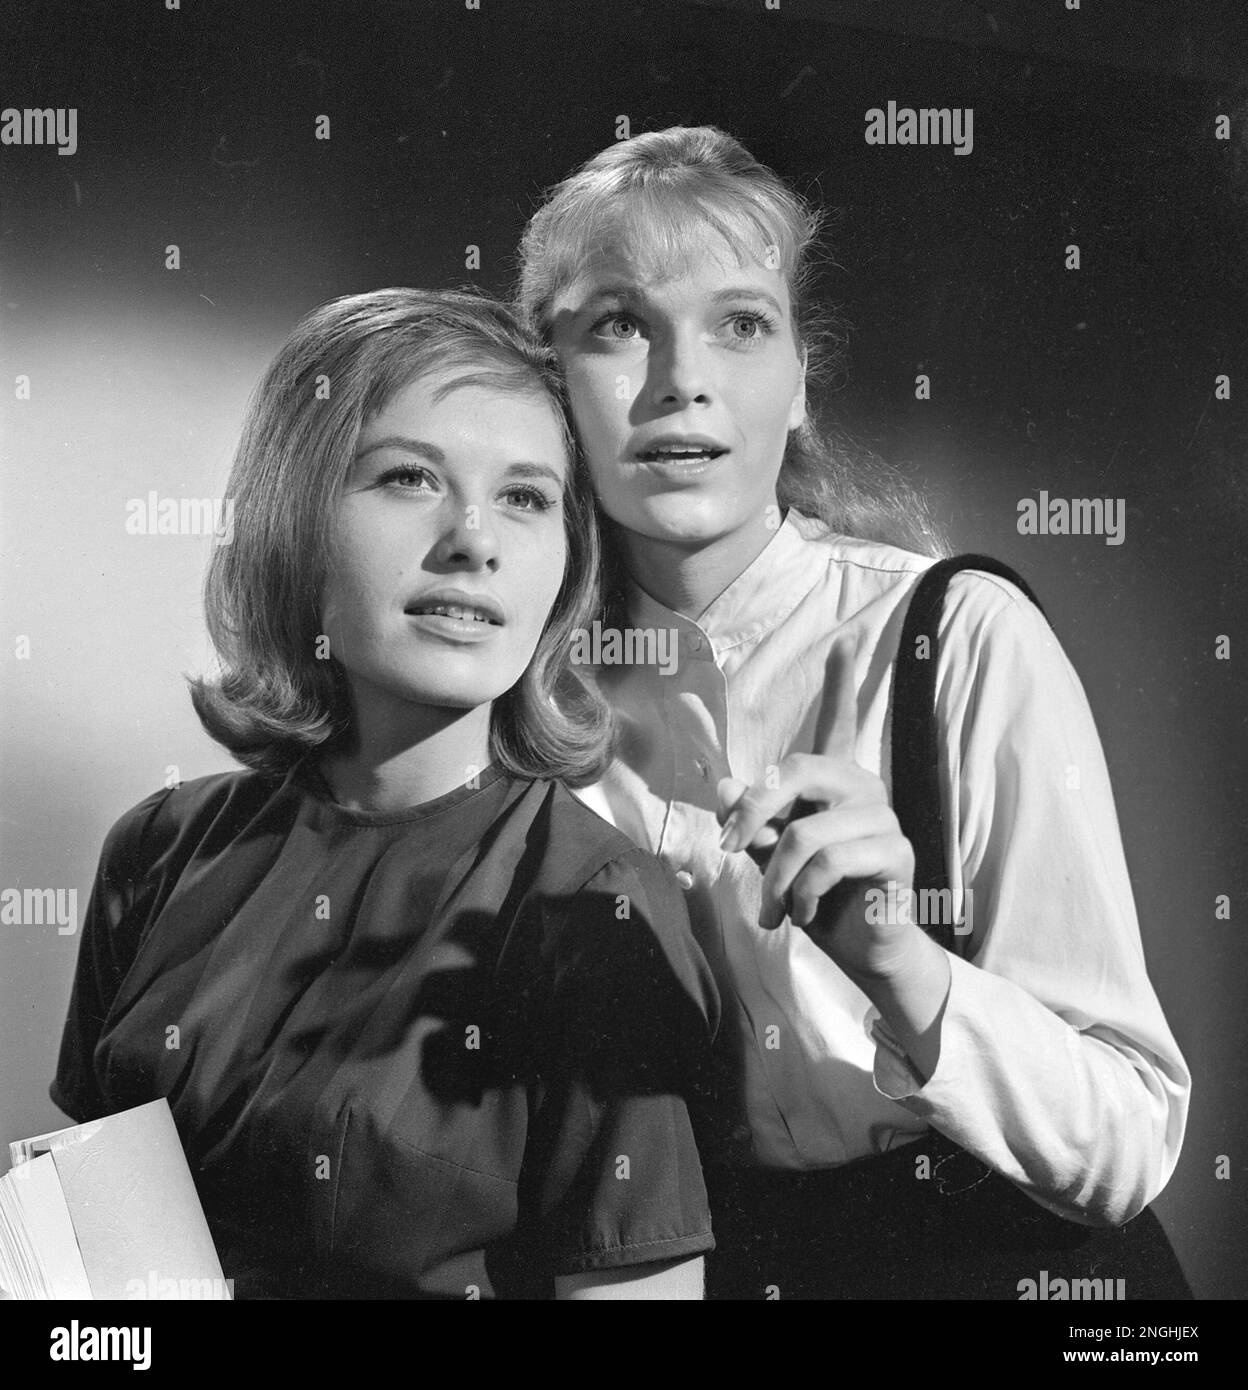 Mia Farrow, right, and Gyl Roland, 19, pose during a break in the filming of their first movie "Peyton Place" in Hollywood, Ca., on Oct. 9, 1963. (AP Photo) Stock Photo